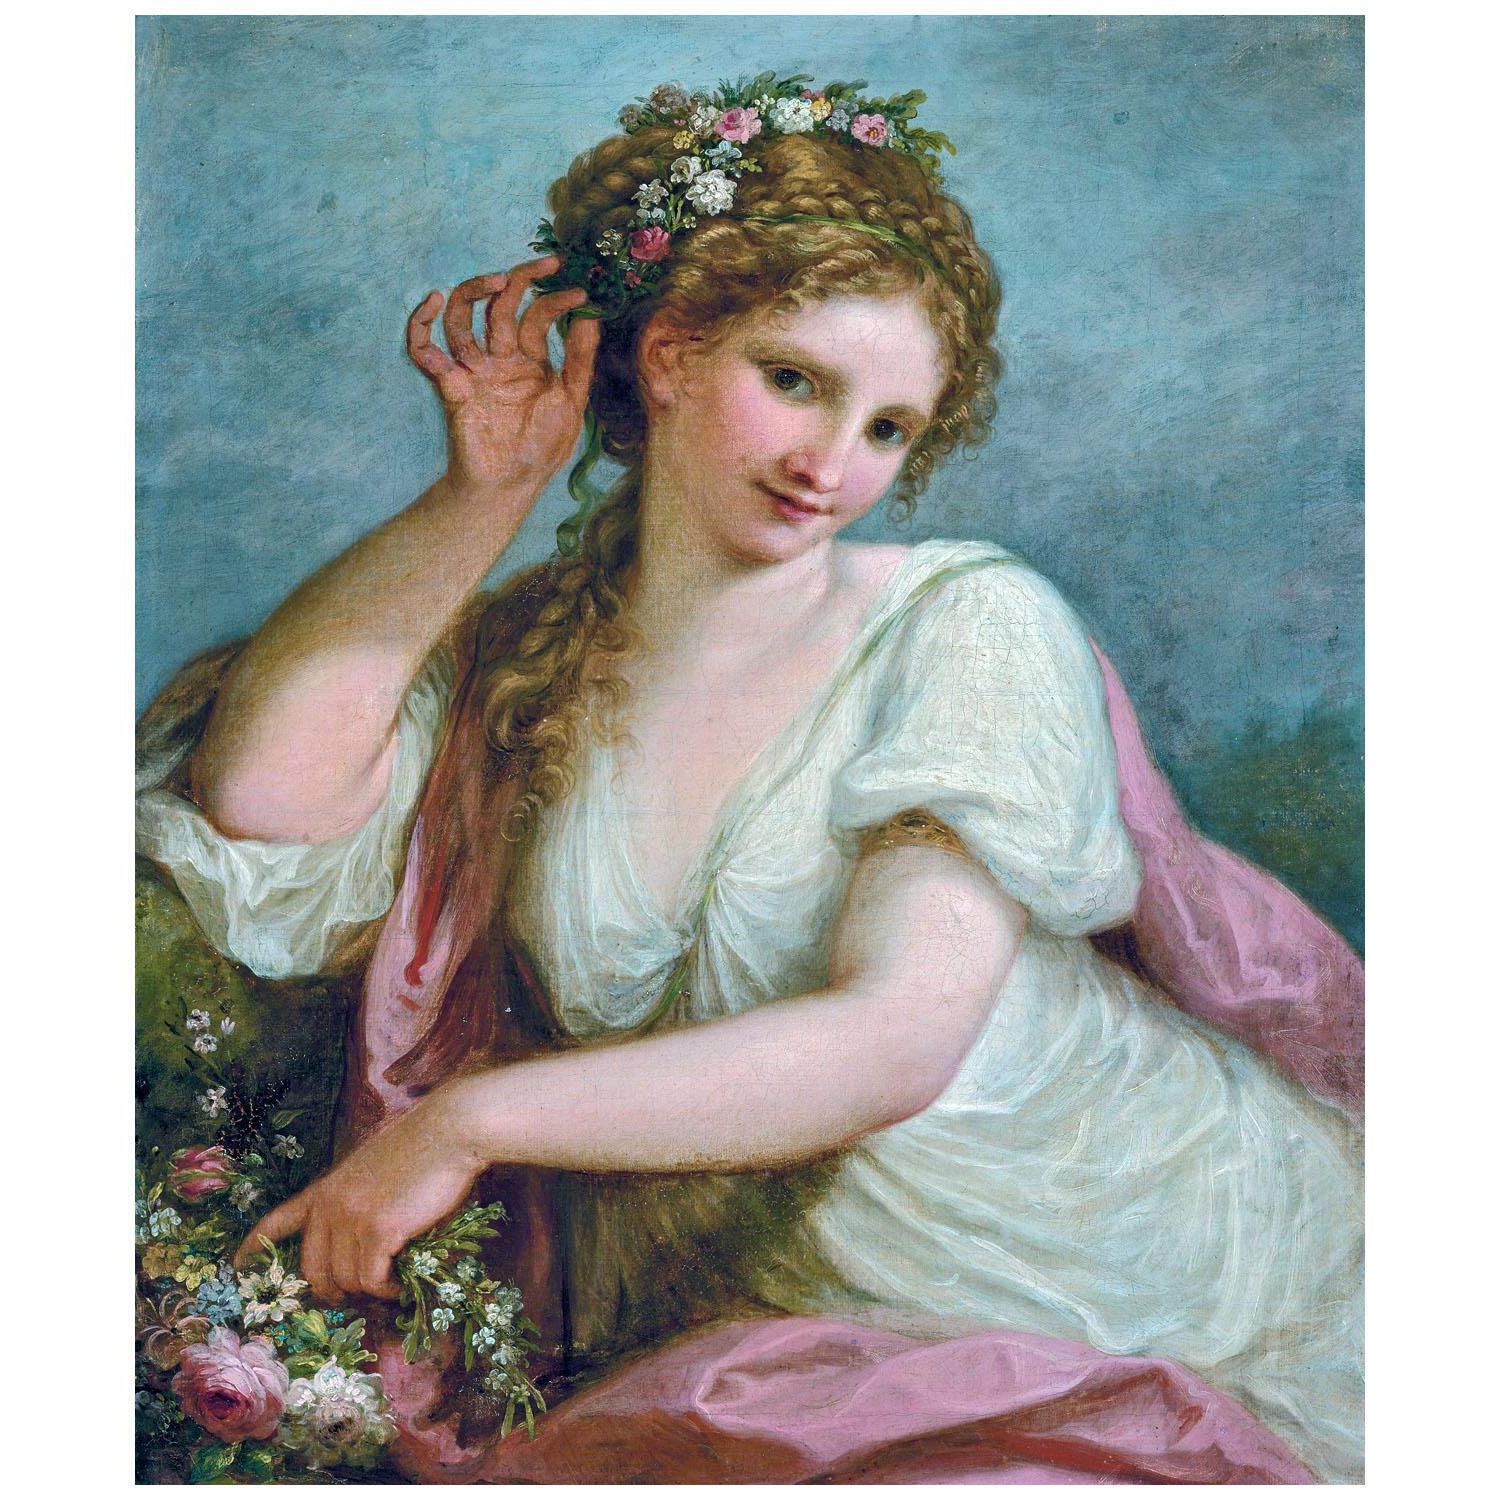 Angelica Kauffmann. Flora. 1785. Private collection